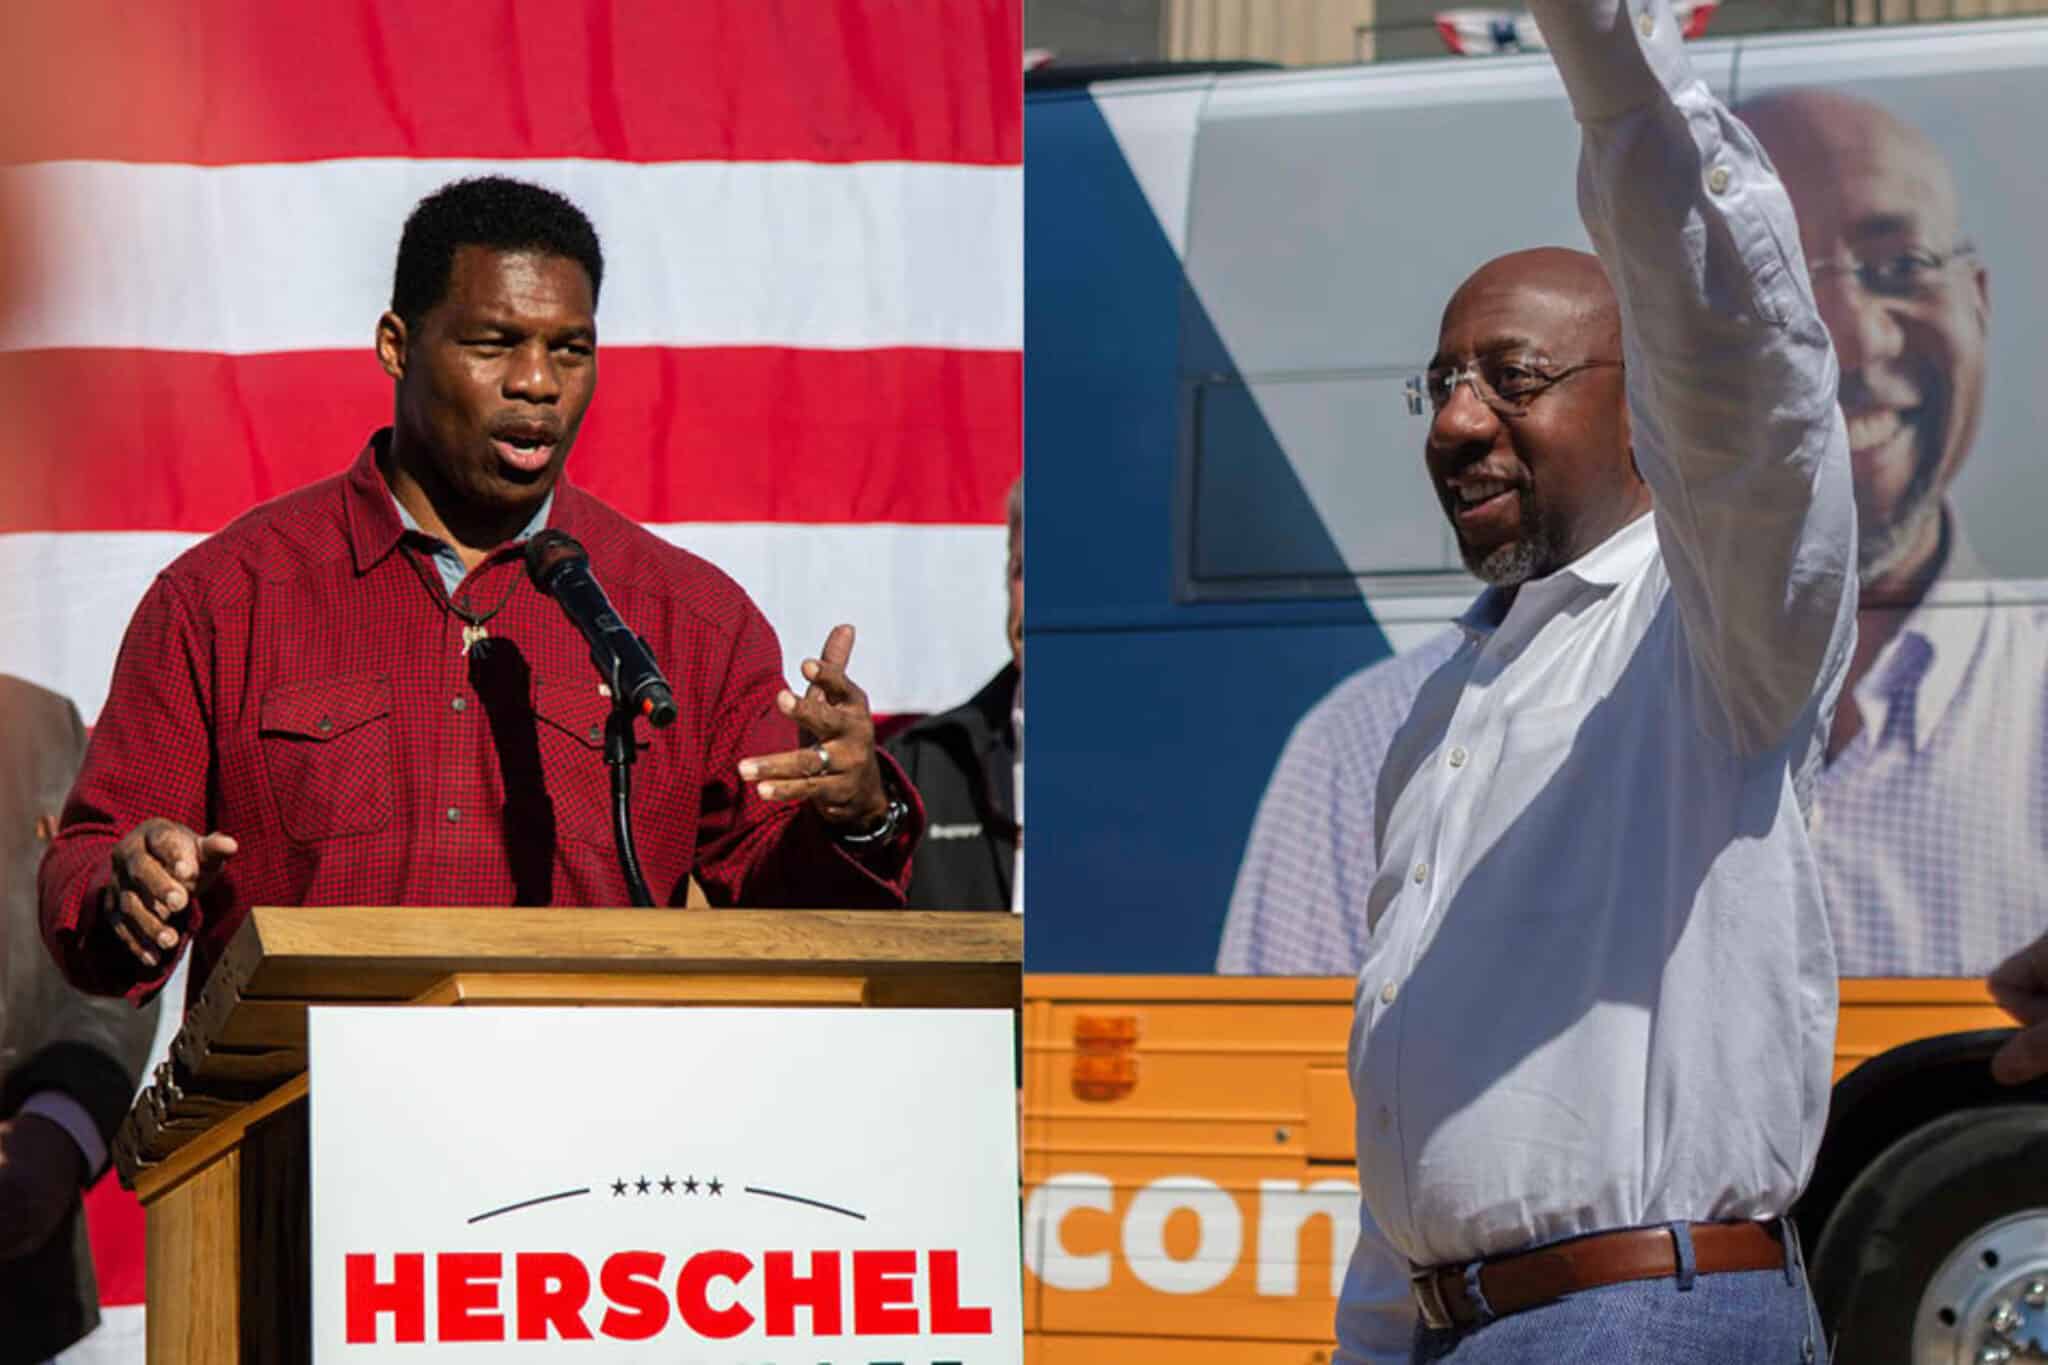 Herschel Walker and Raphael Warnock are ready for the senate runoff. Are you?